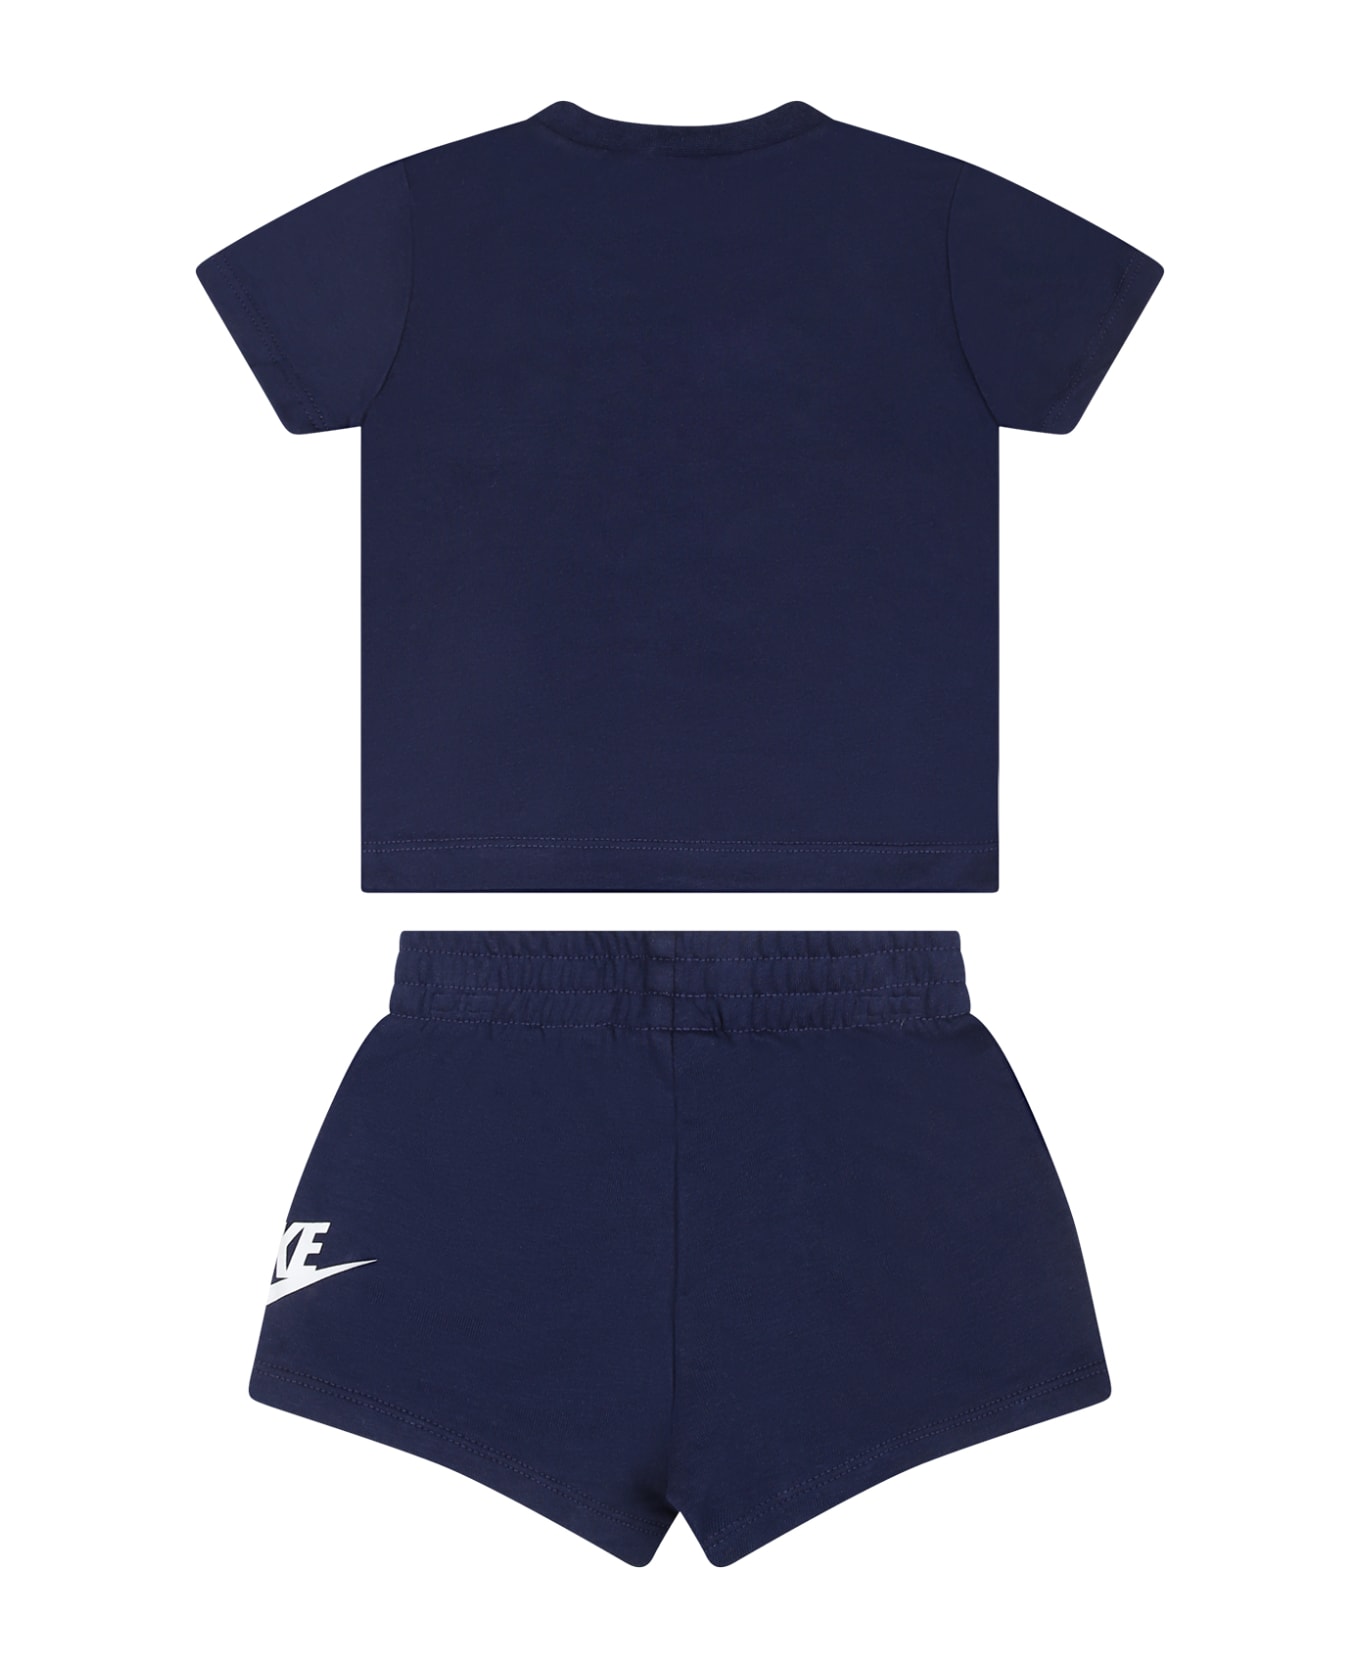 Nike Blue Suit For Boy With Logo - Blue